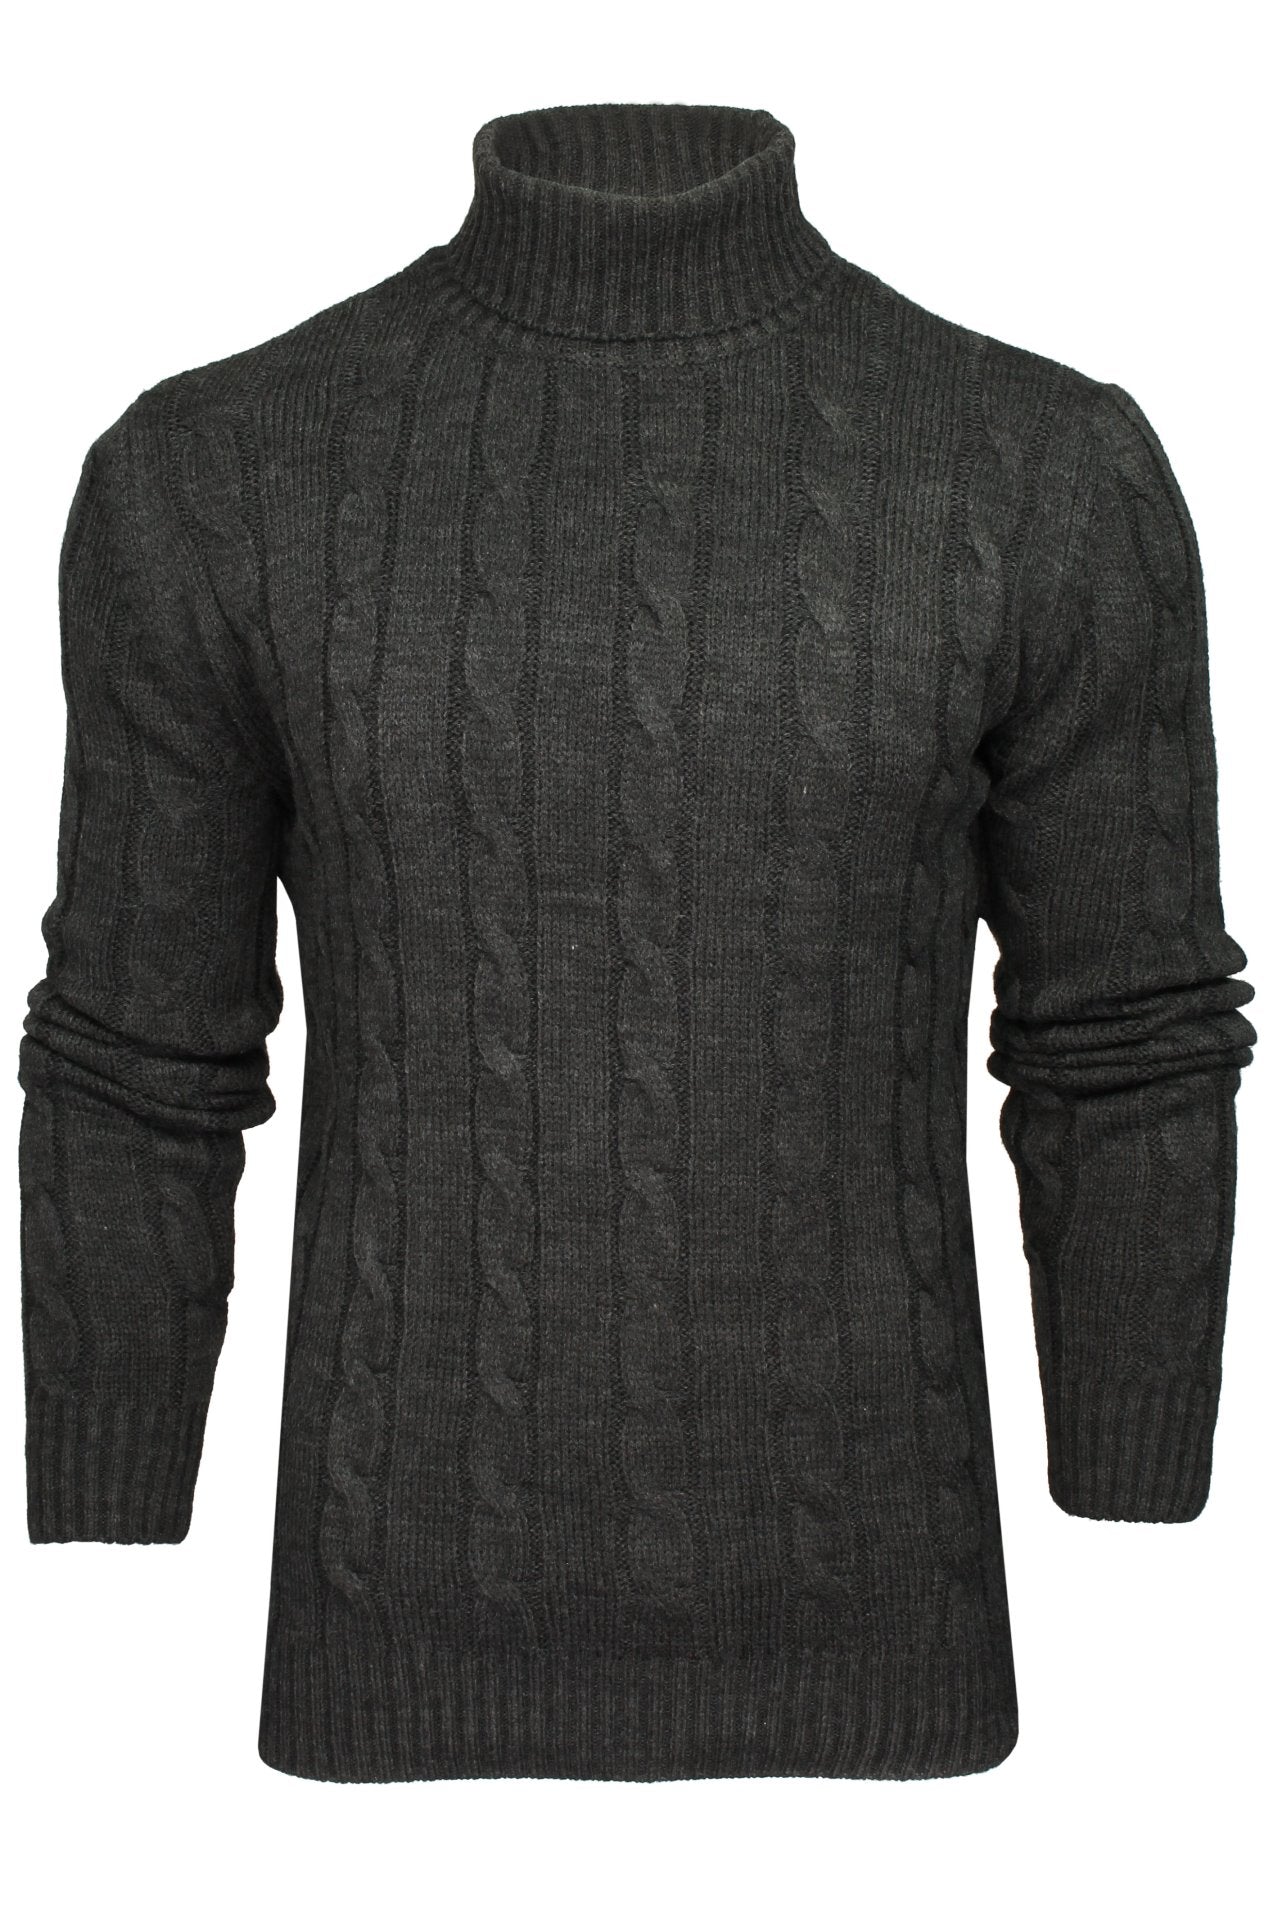 Xact Men's Roll Neck Cable Knit Jumper-Main Image